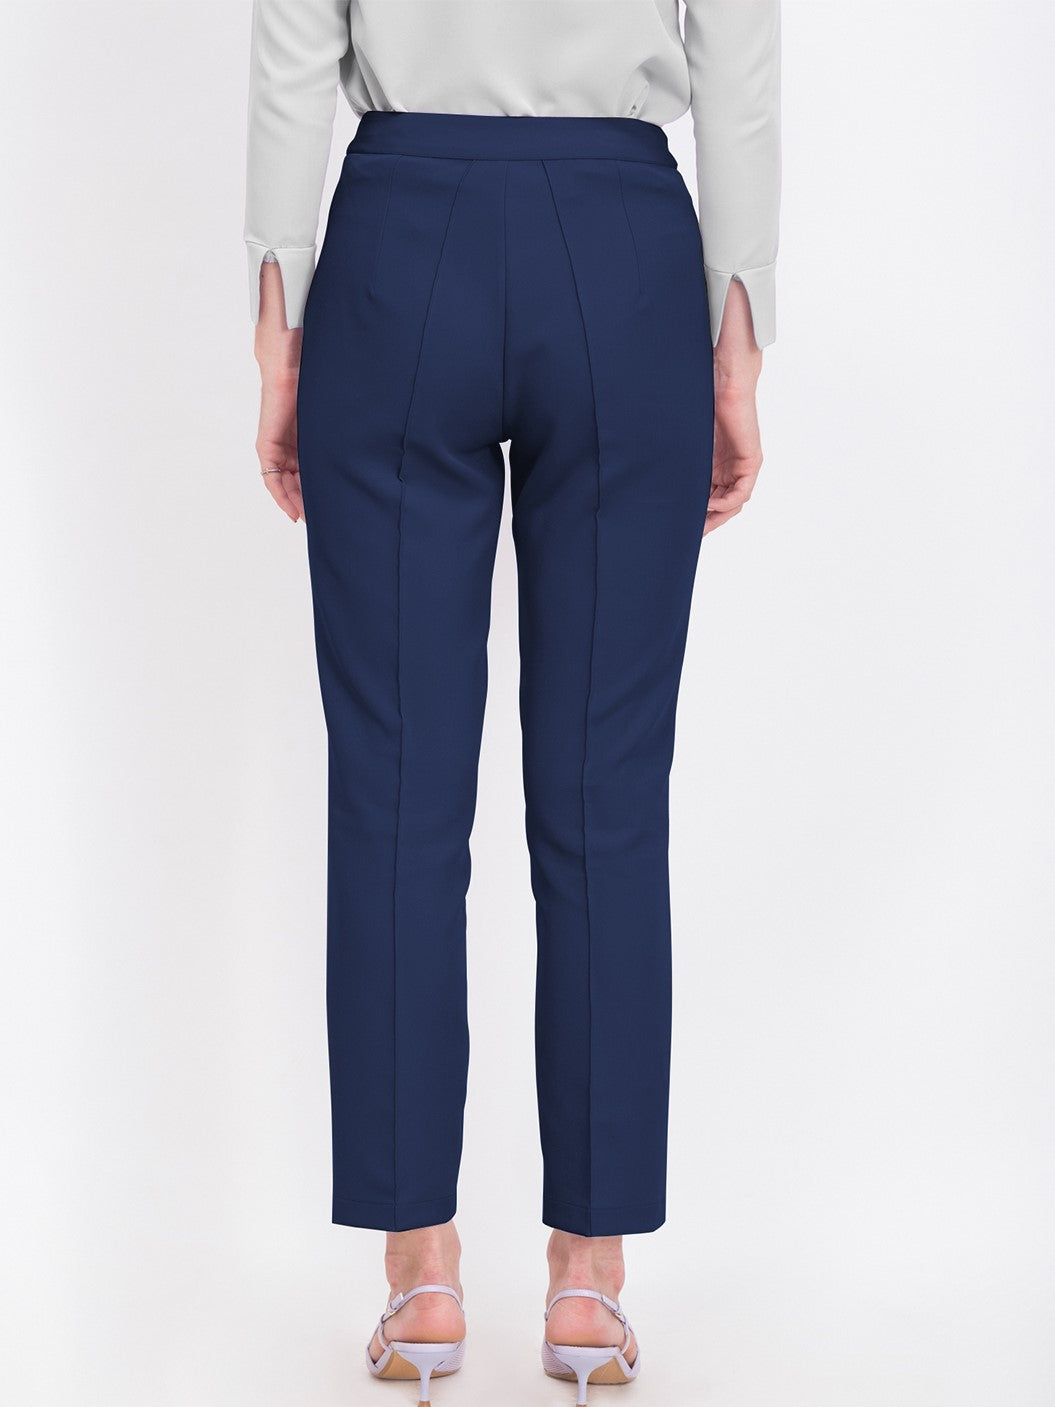 Formal Wear Straight Fit Blue Pants - Ships in 24 Hrs